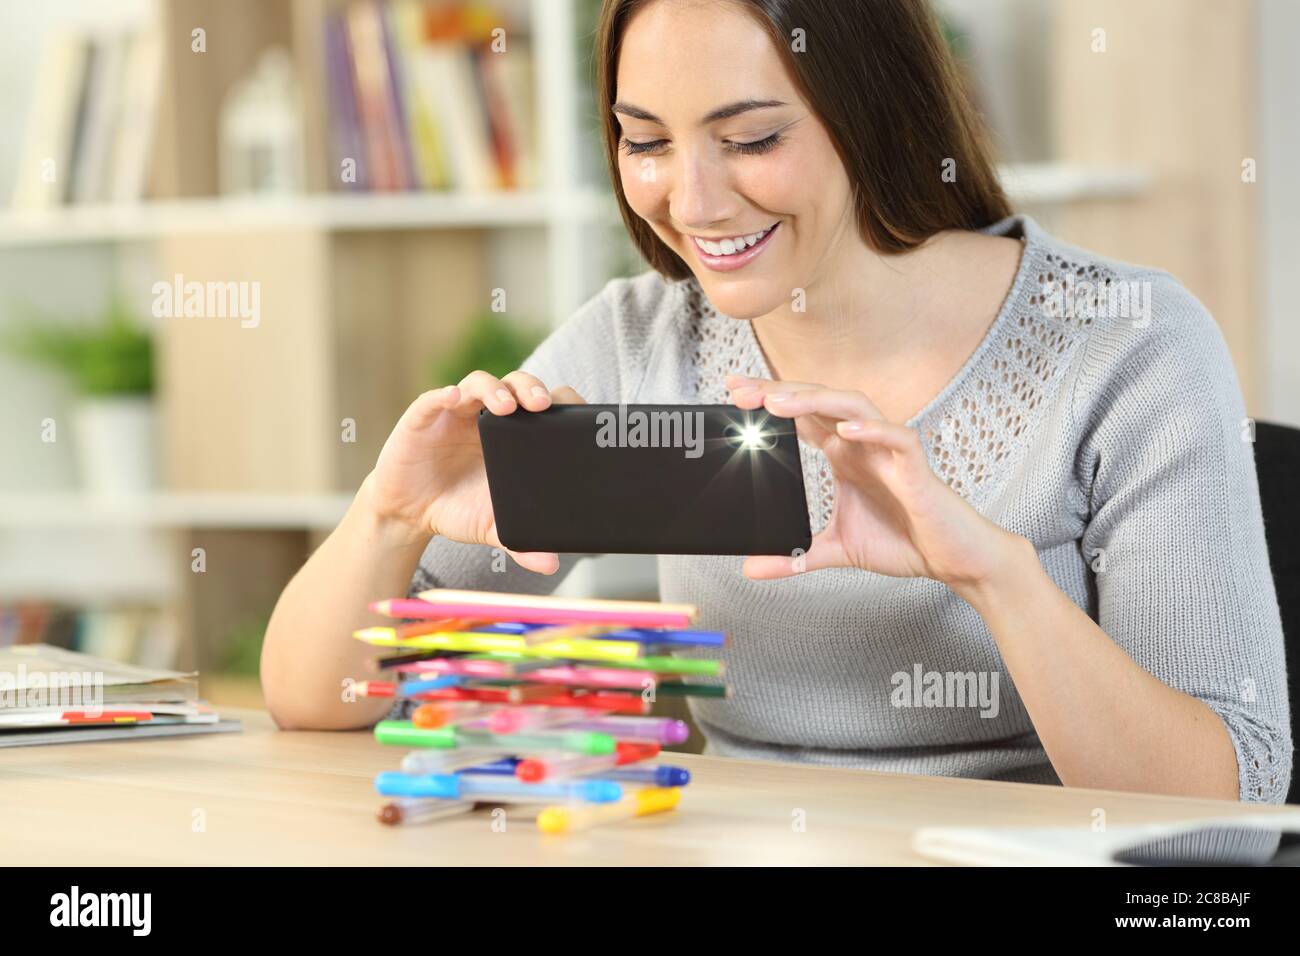 Happy woman taking photo with flash on smart phone sitting on a desk at home Stock Photo